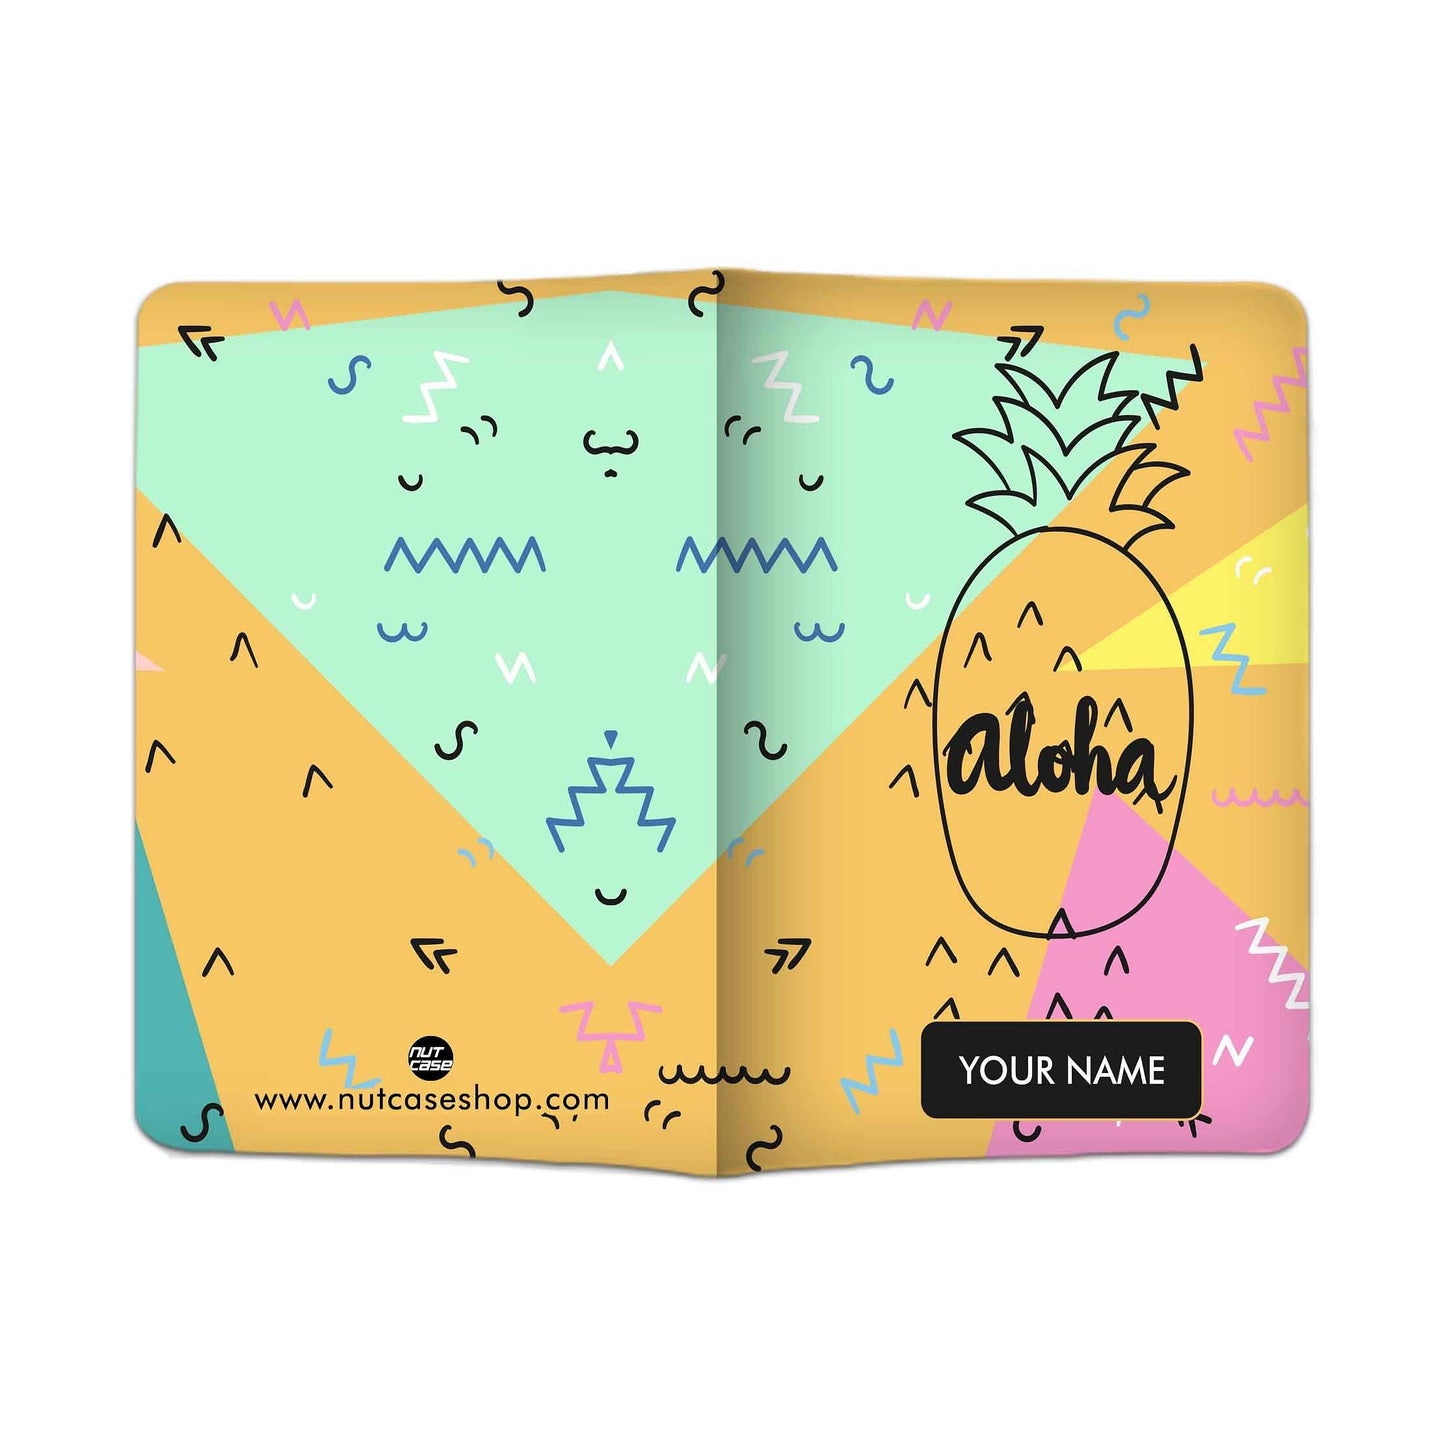 Personalized Cool Passport Cover -  Aloha Nutcase